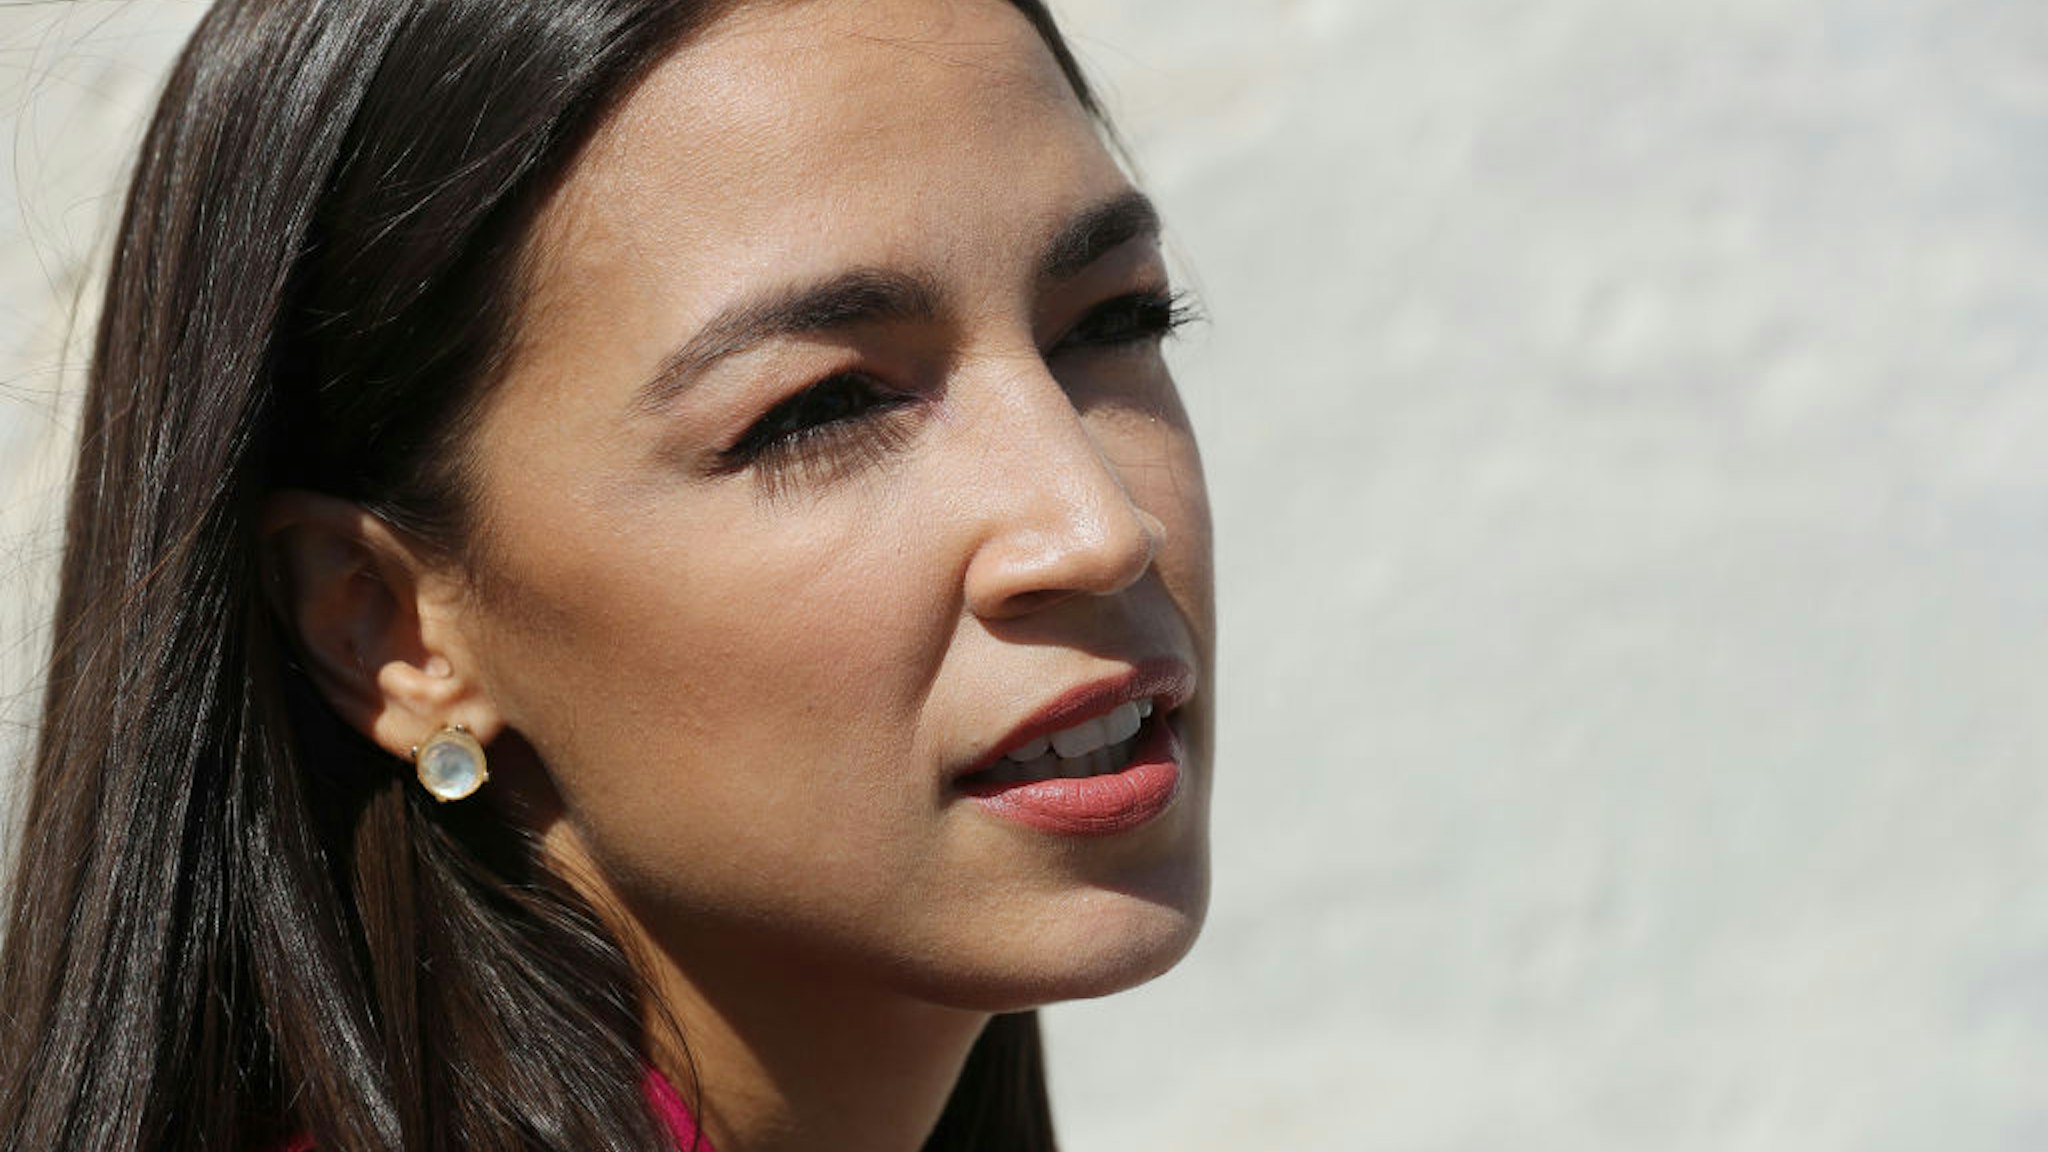 Rep. Alexandria Ocasio-Cortez (D-NY) talks to reporters before heading into the U.S. Capitol Building for final votes before a two-week state work period September 27, 2019 in Washington, DC.